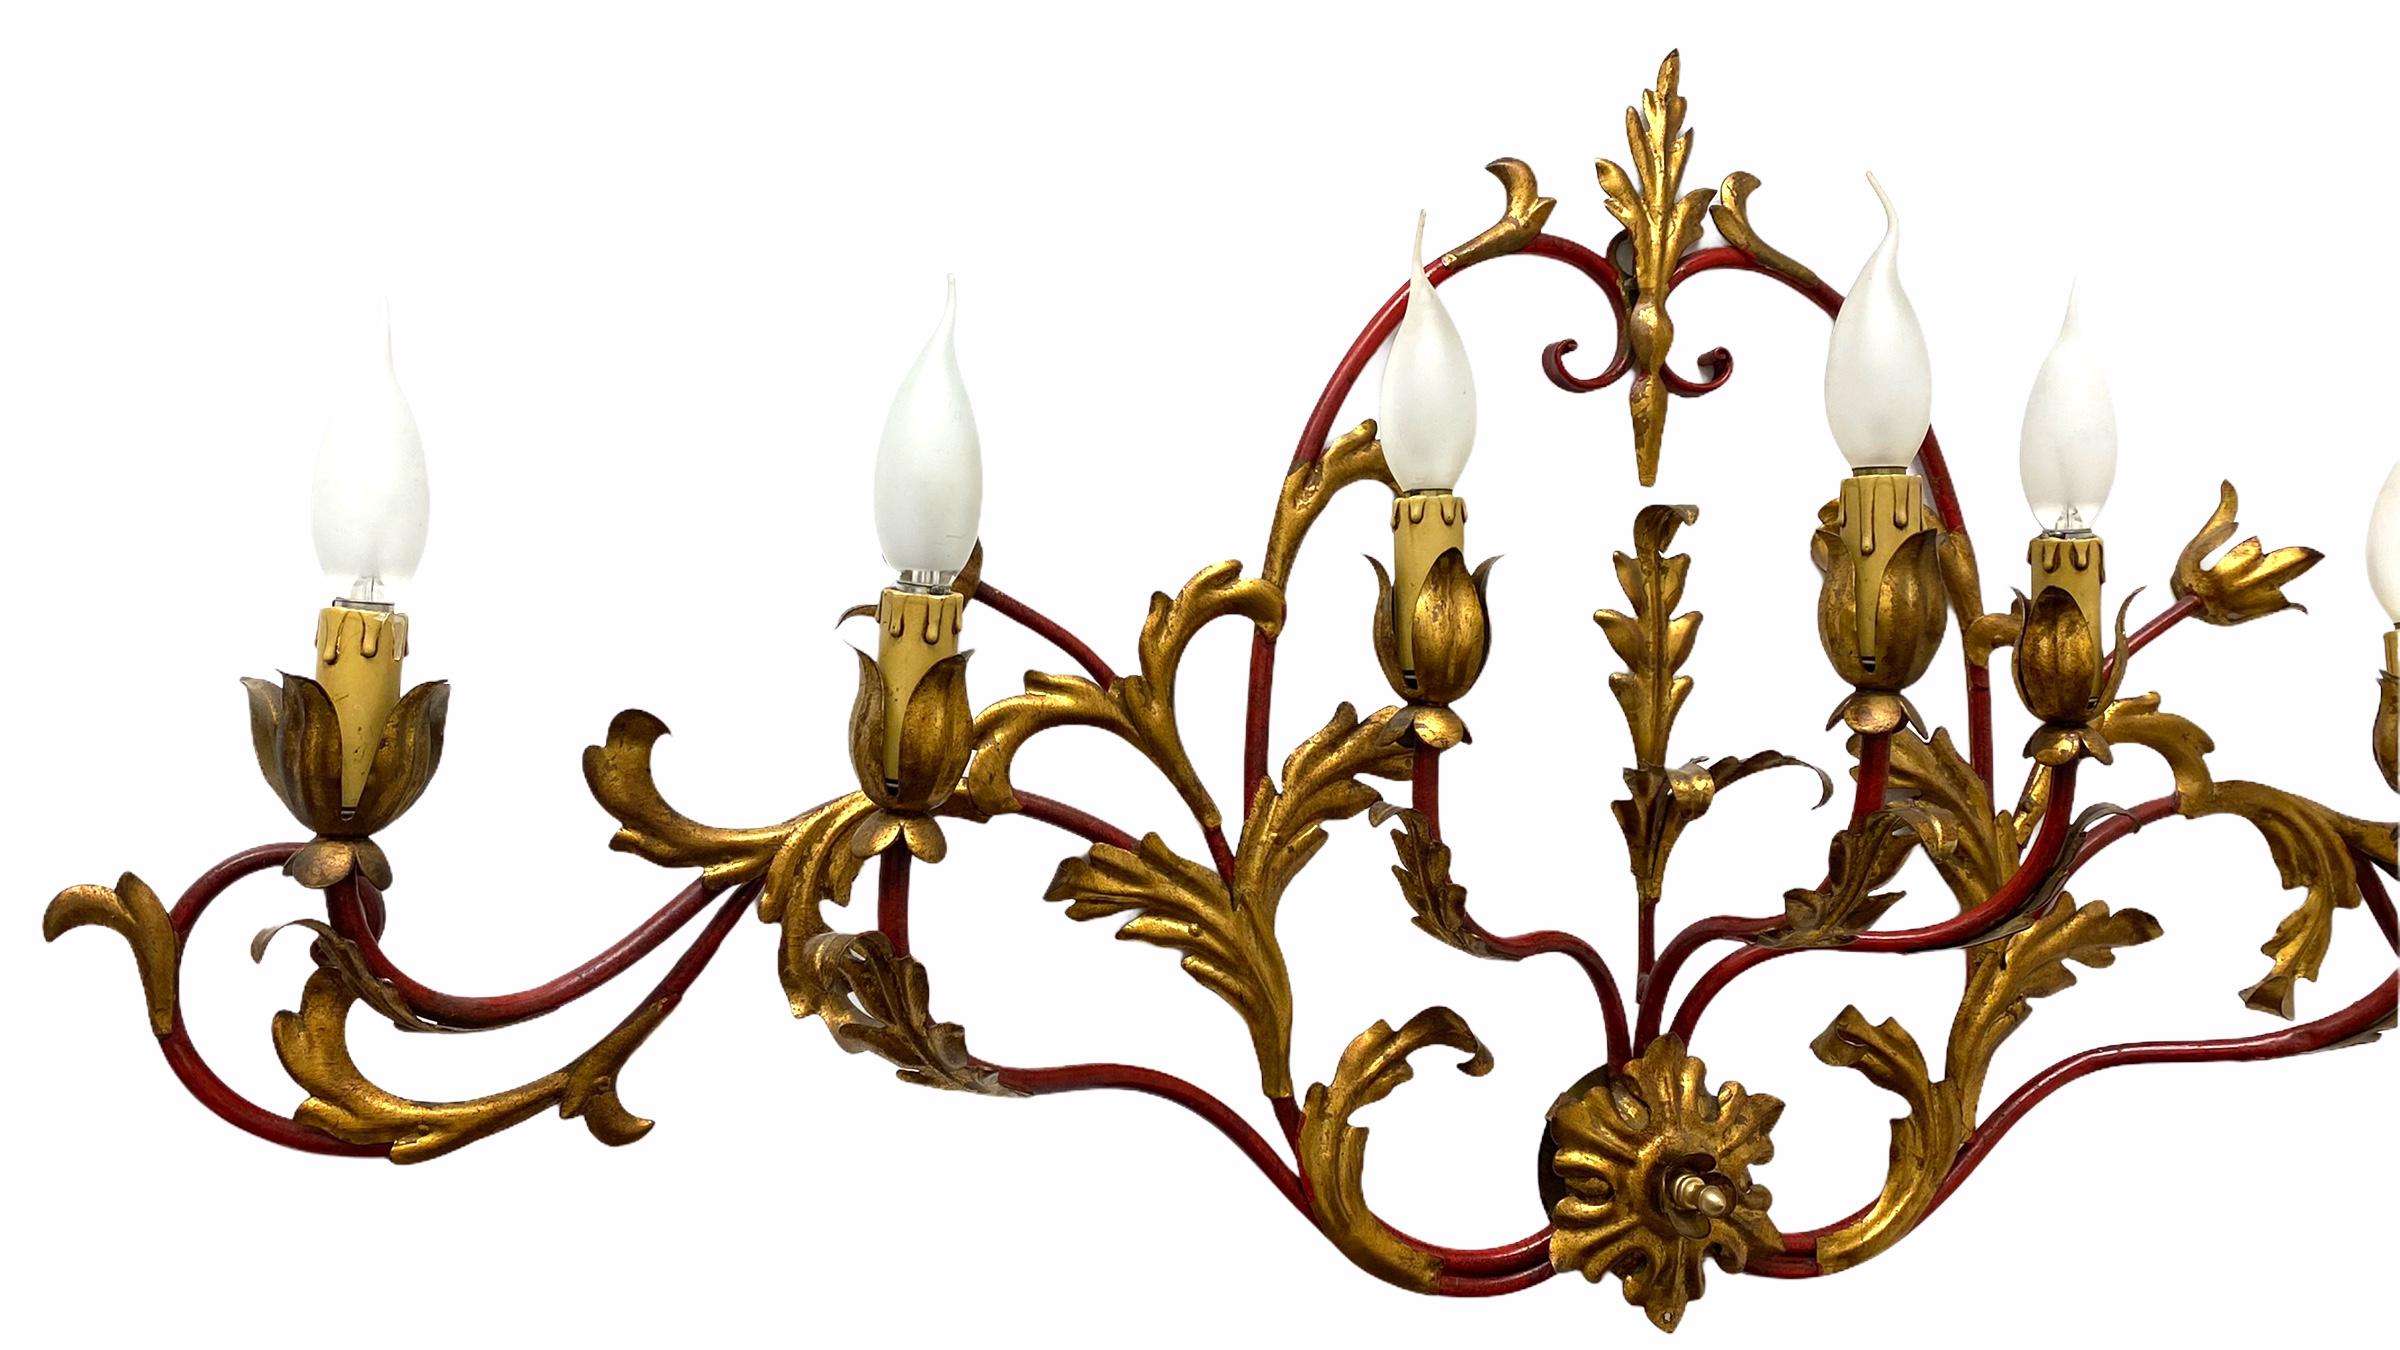 Add a touch of opulence to your home with this charming monumental sconce. Perfect gilt metal leafs on red rods, to enhance any chic or eclectic home. We'd love to see it hanging in an entryway as a charming welcome home. Built in the 1960s,